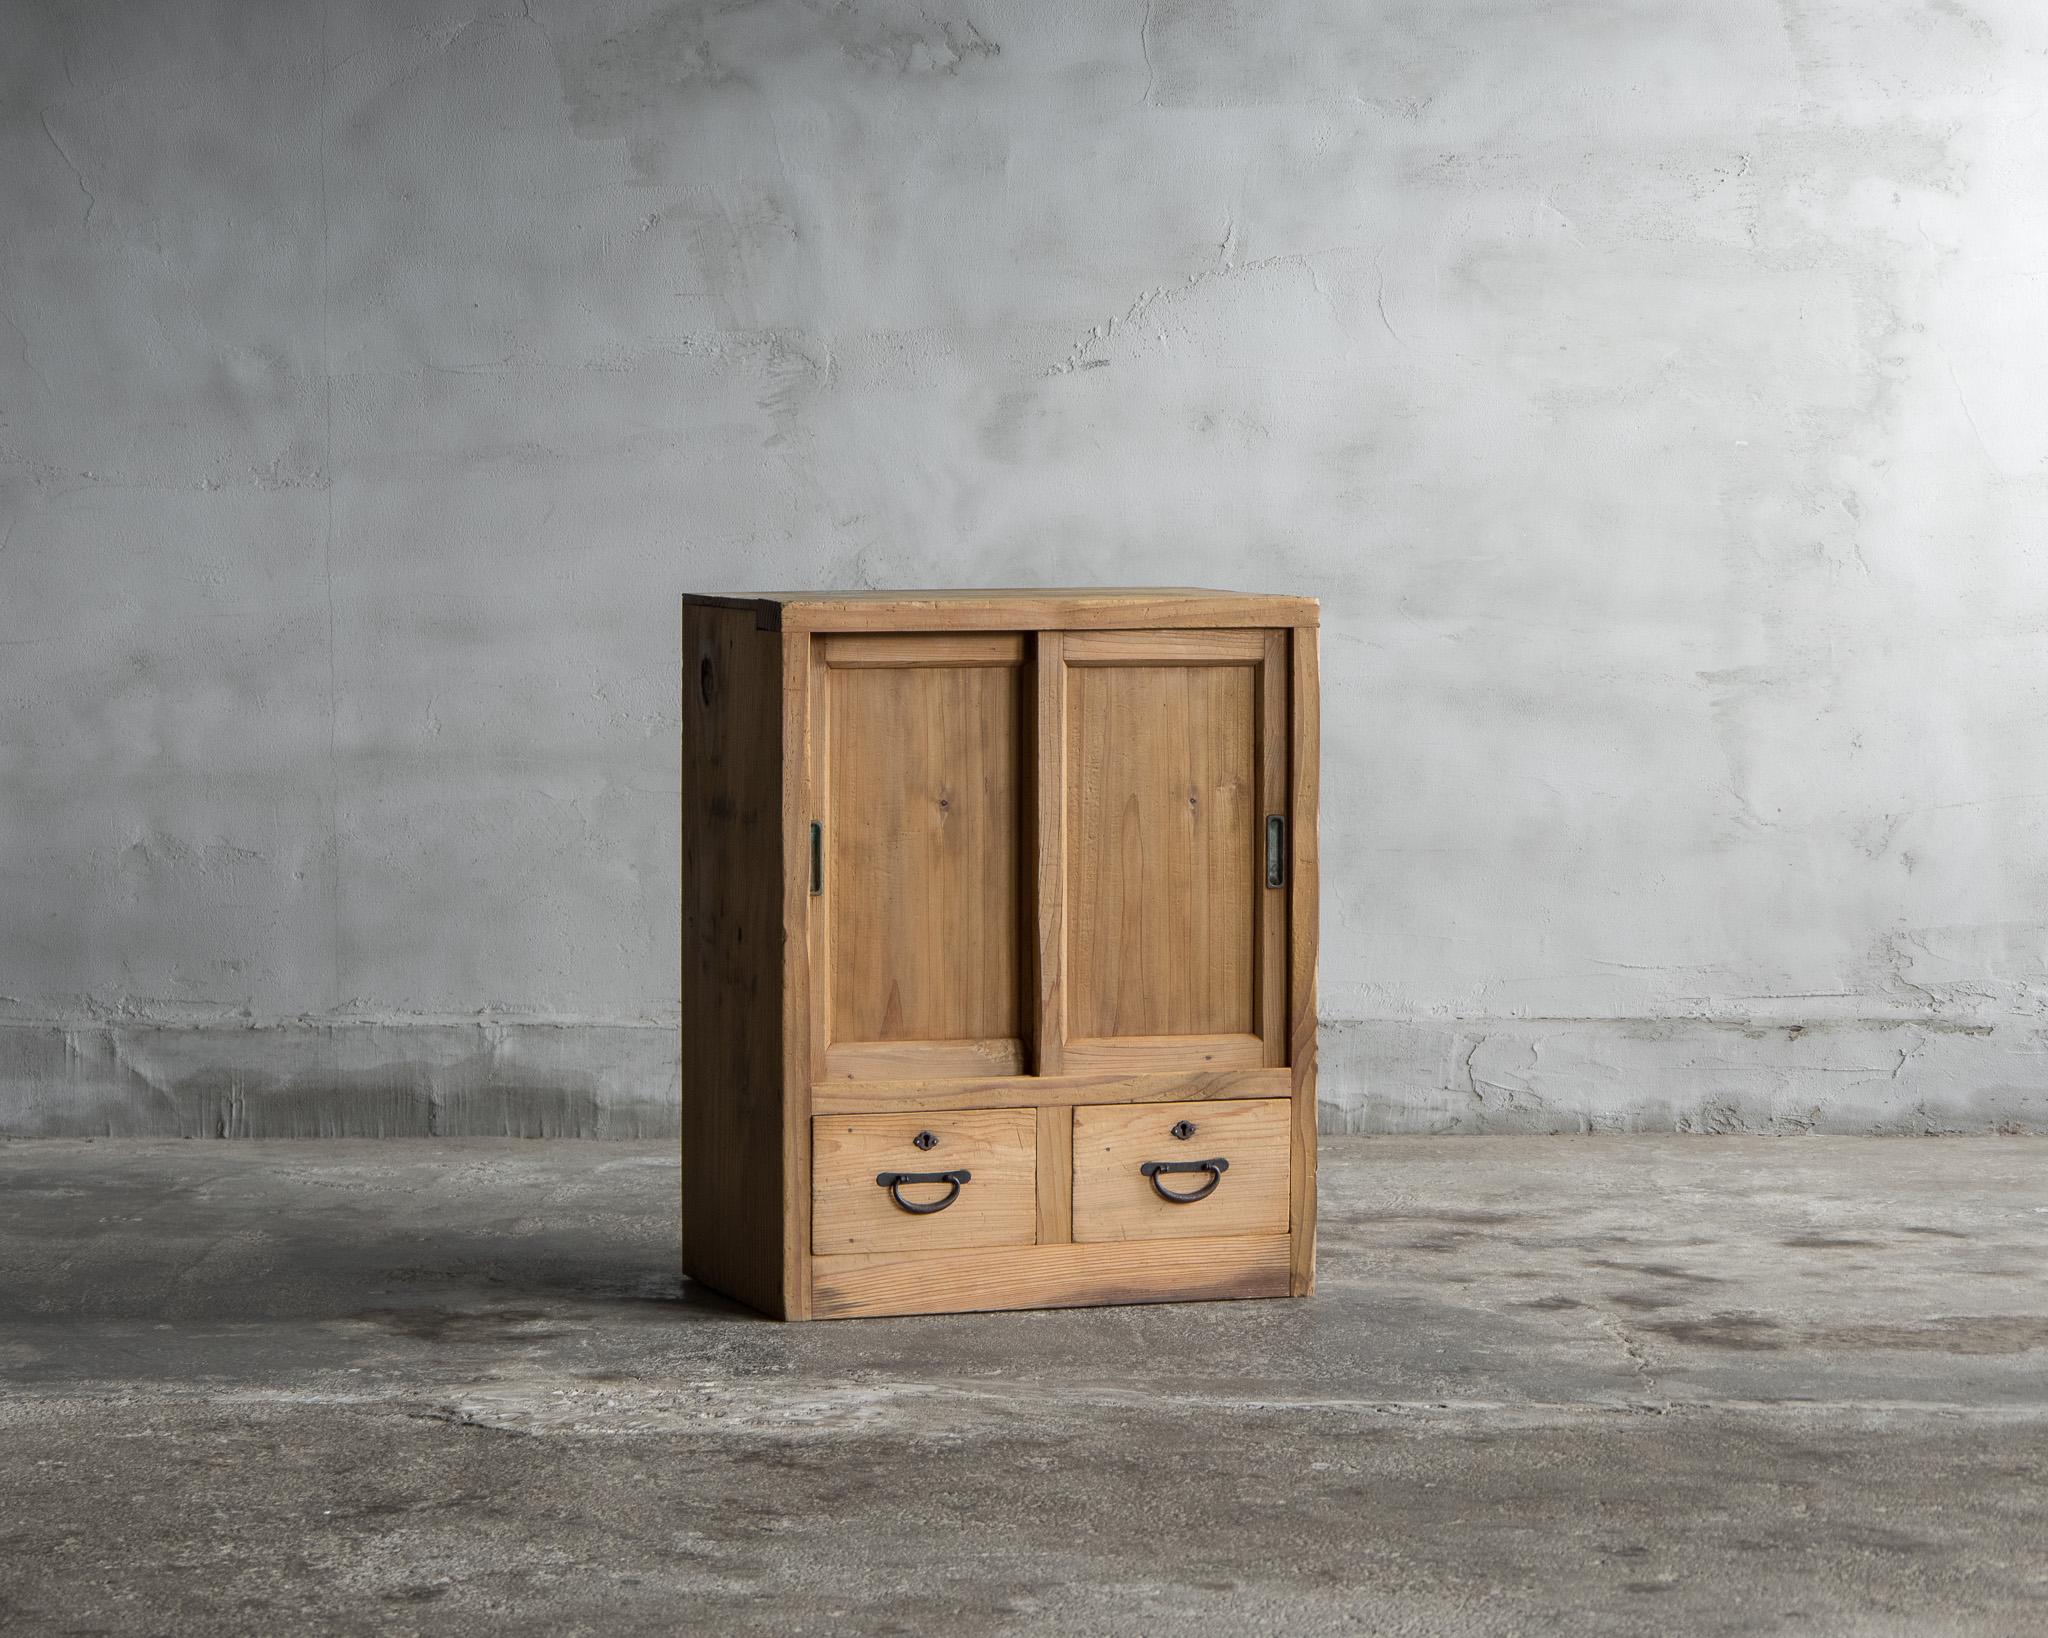 This is a small cupboard of Japanese antique.
It was made in the Taisho period. (1912-1926)

This is a charming little cupboard that exudes a rustic allure. Crafted from natural cedar wood, its warm texture brings coziness to any interior.

Despite